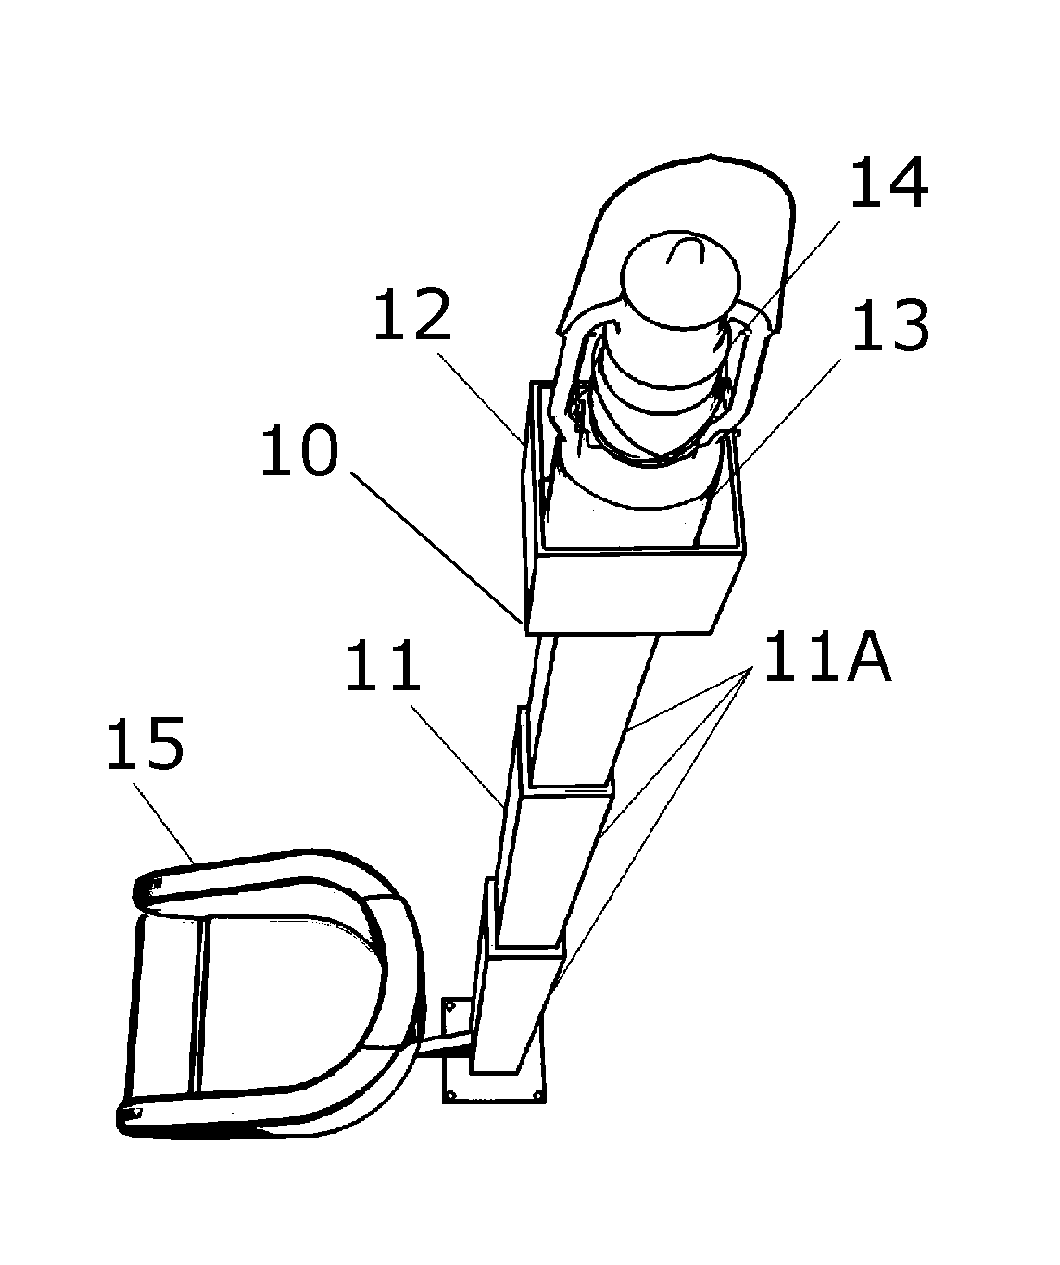 Stable elevated lamp for a fishing boat